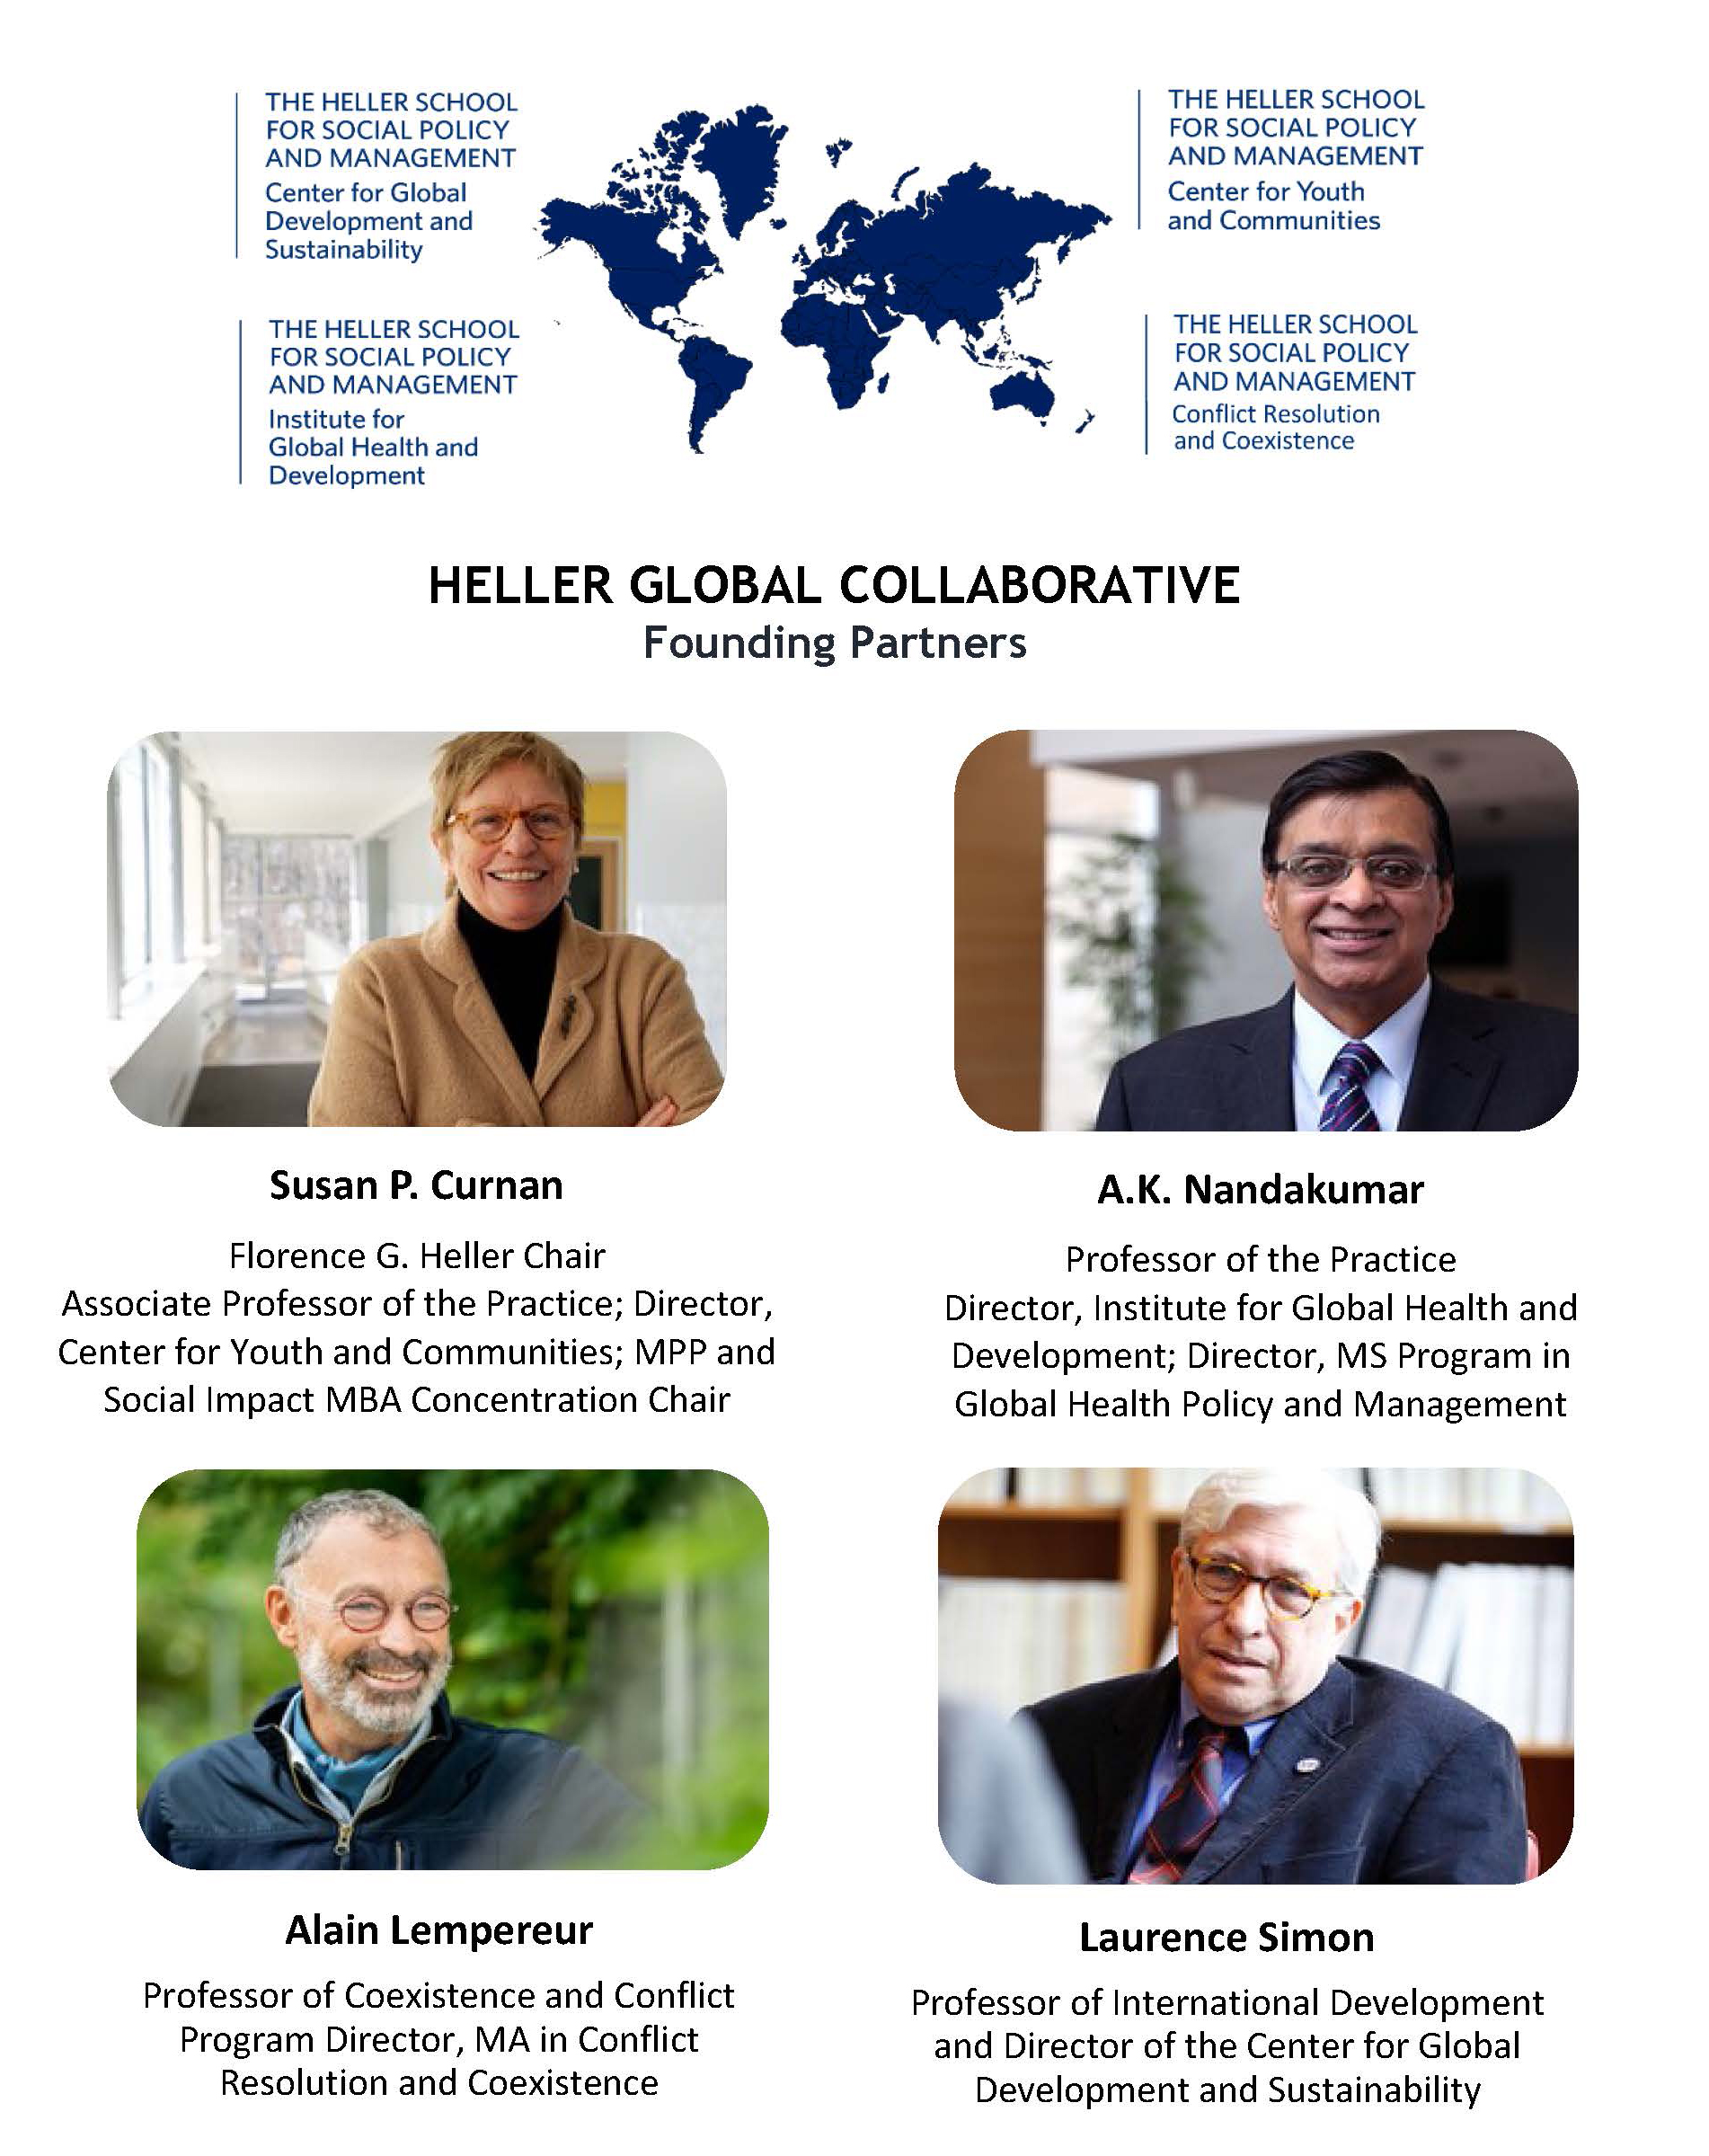 Heller Global Collaborative logos and founders